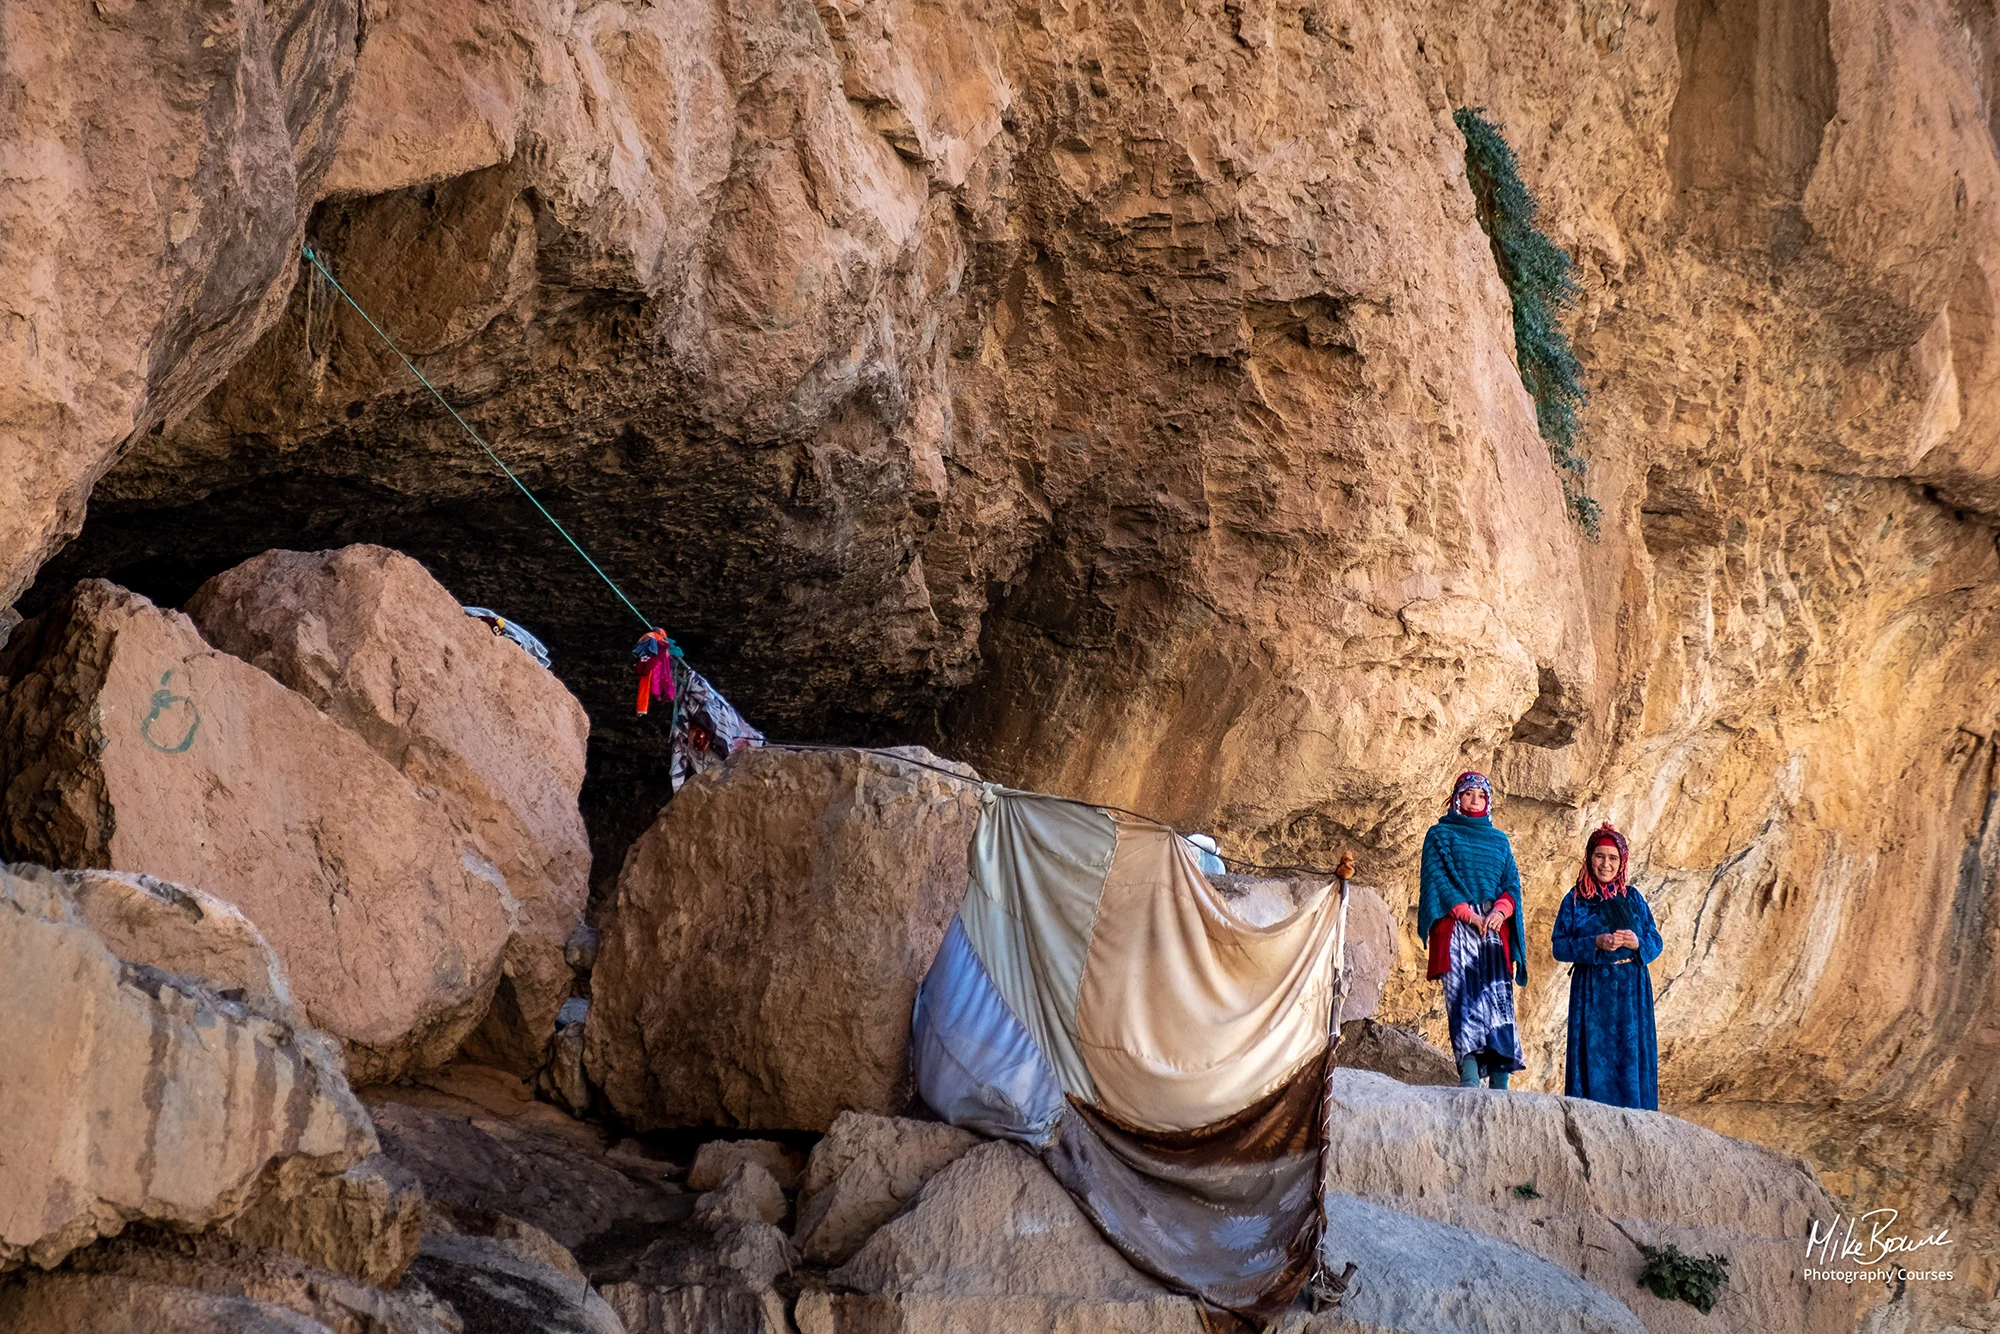 Mother and daughter standing outside their cave home in Todra Gorge, Morocco